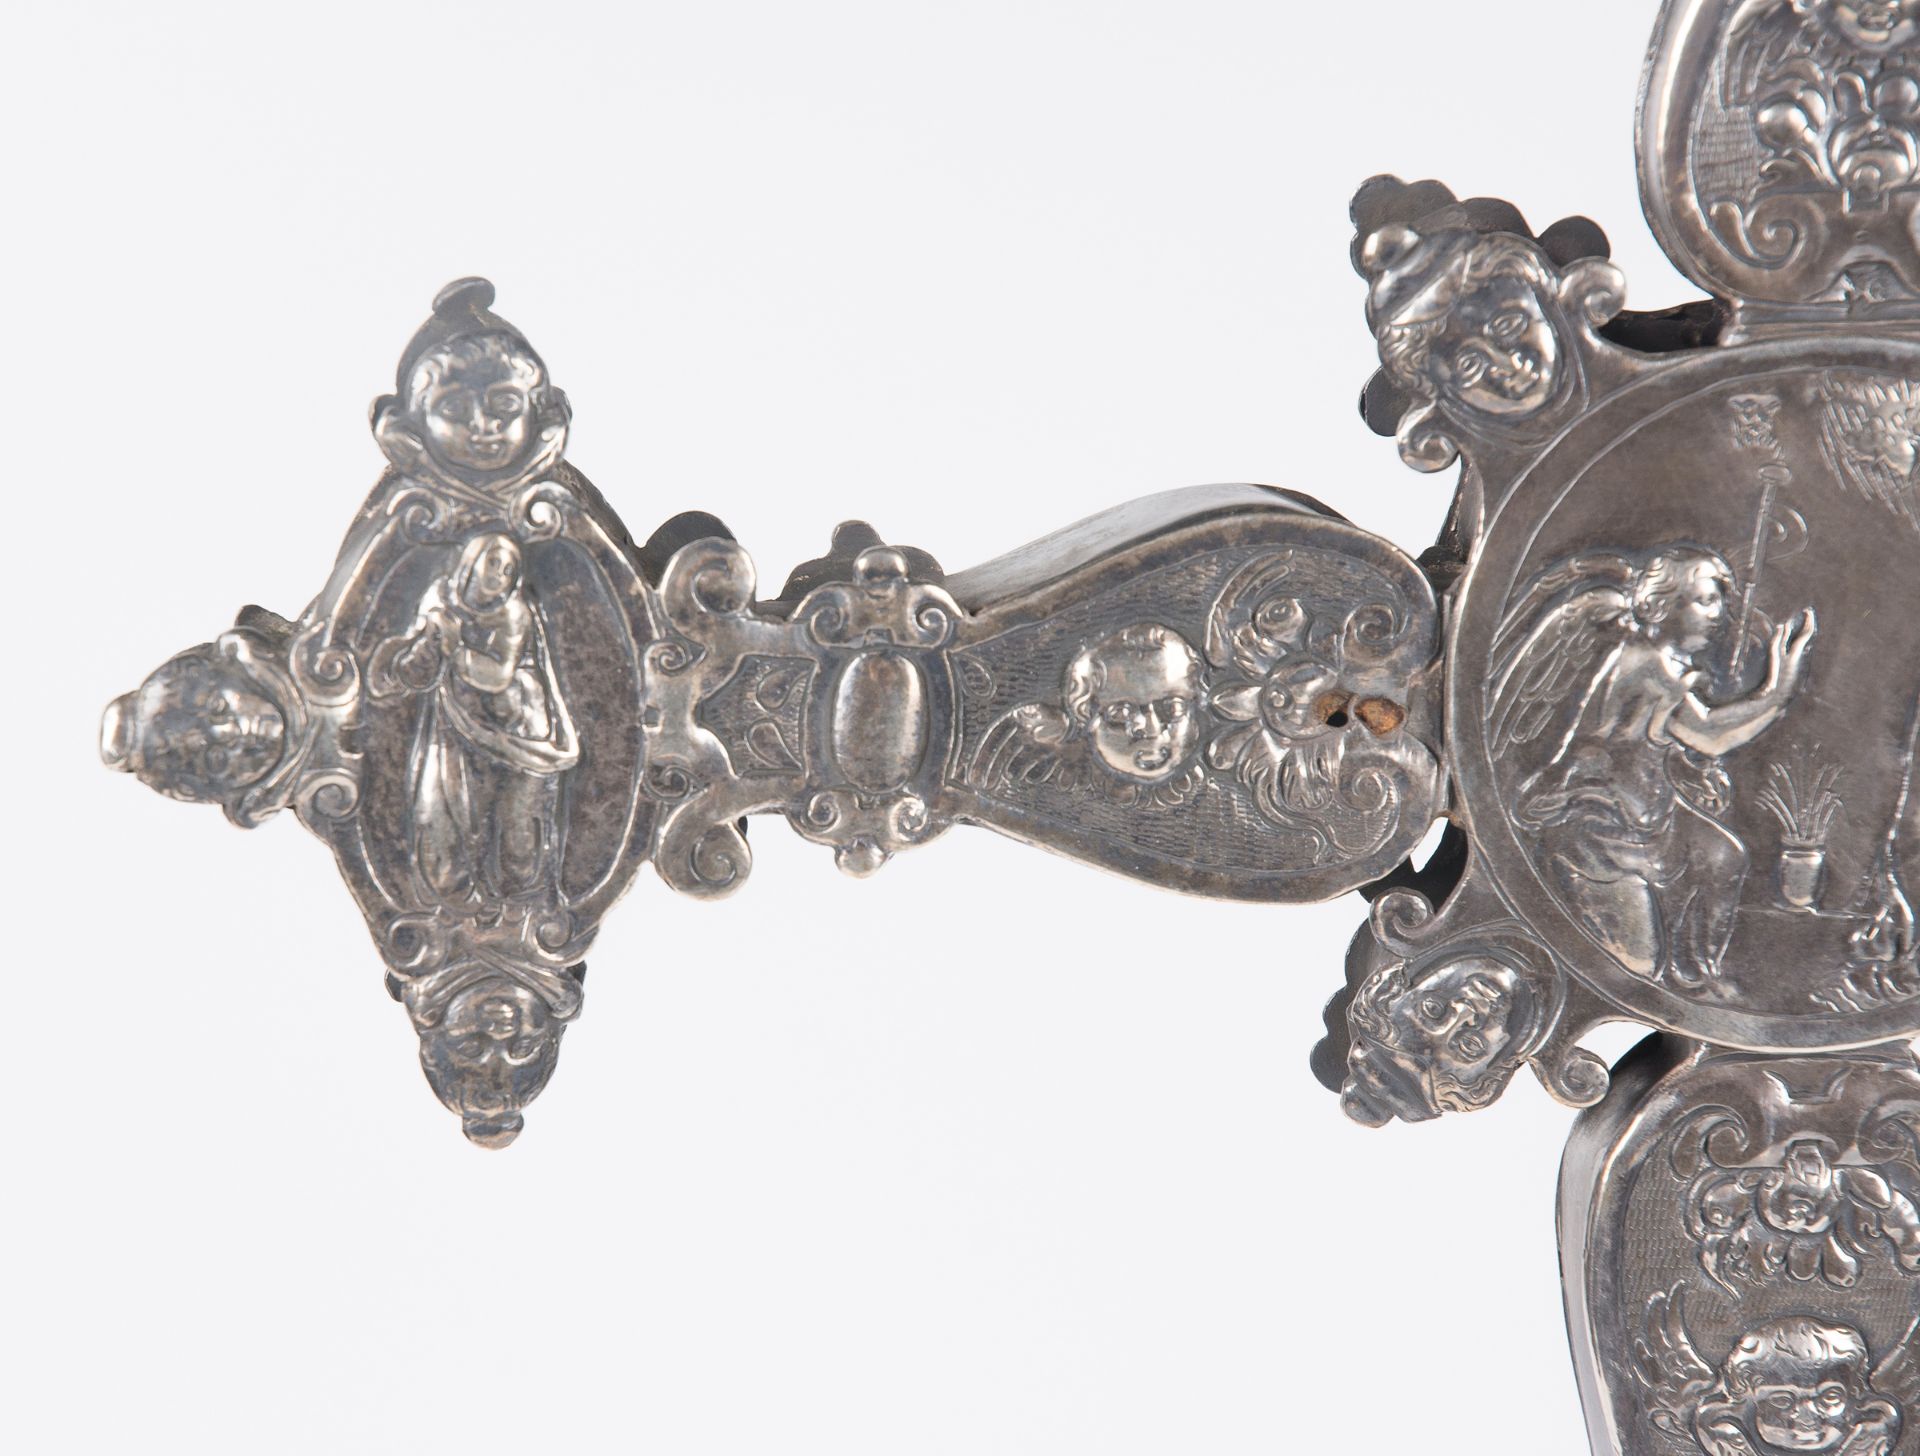 Large, chased silver processional cross. 16th century. - Image 3 of 14